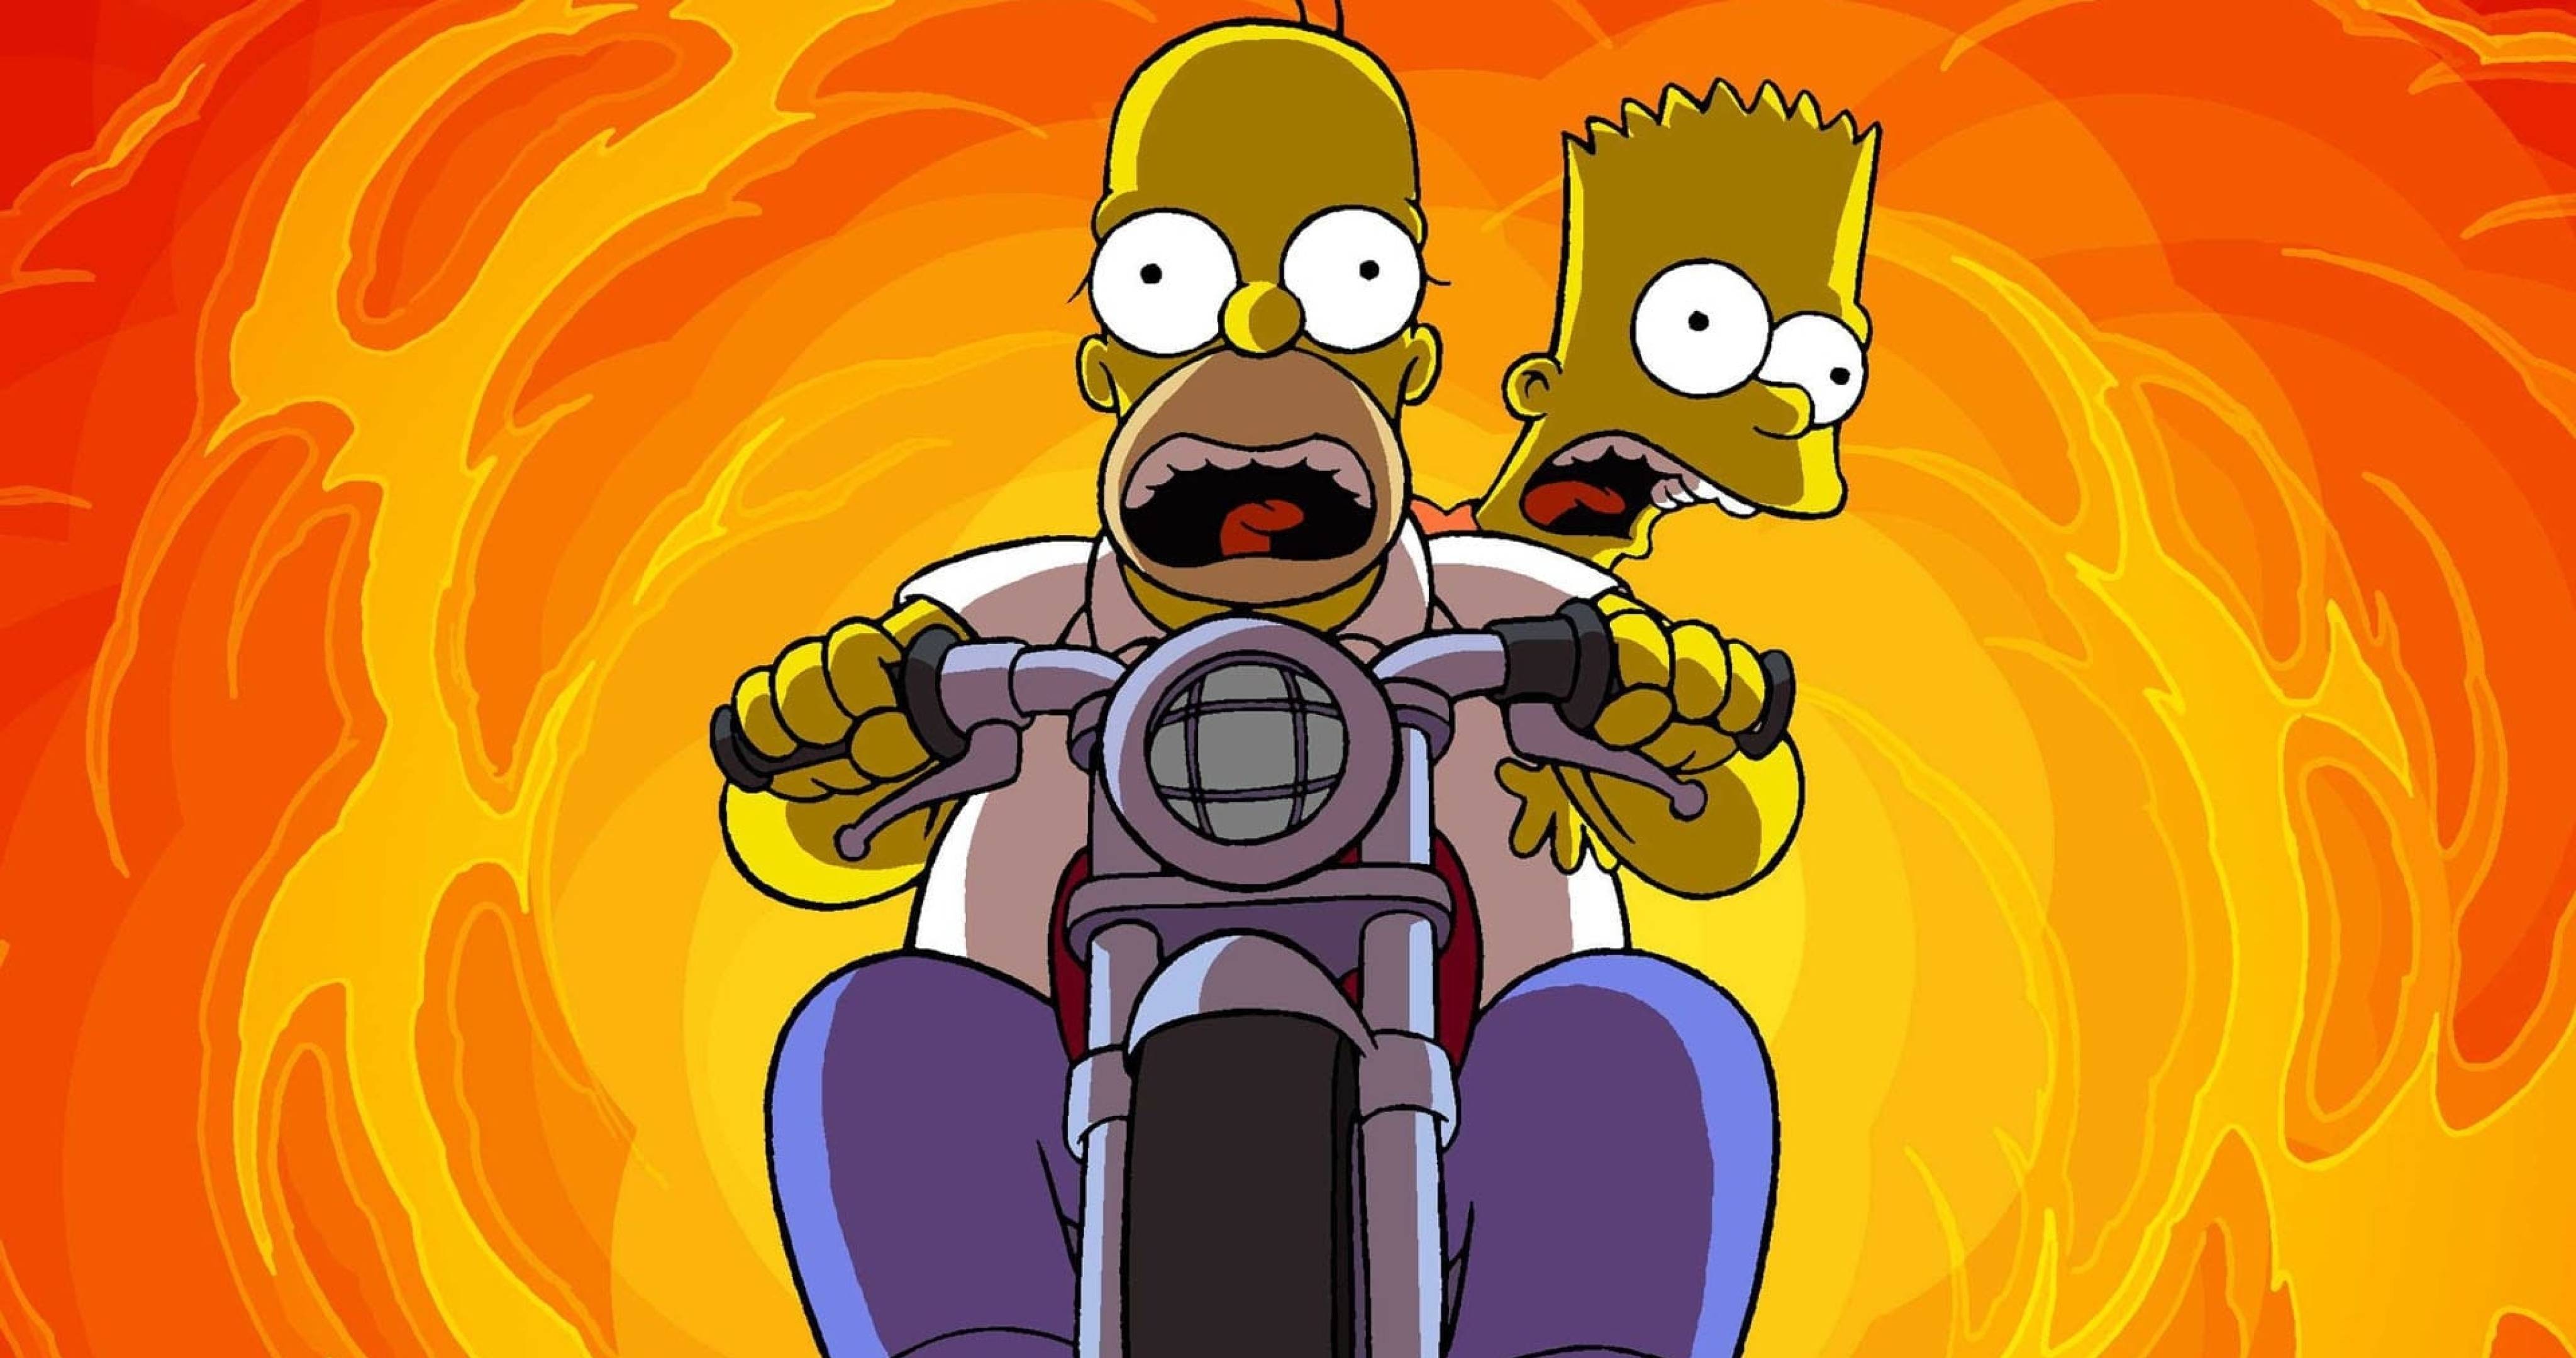 Homer Simpson and Bart Simpson 4096x2160 Resolution Wallpaper, HD TV Series 4K Wallpaper, Image, Photo and Background